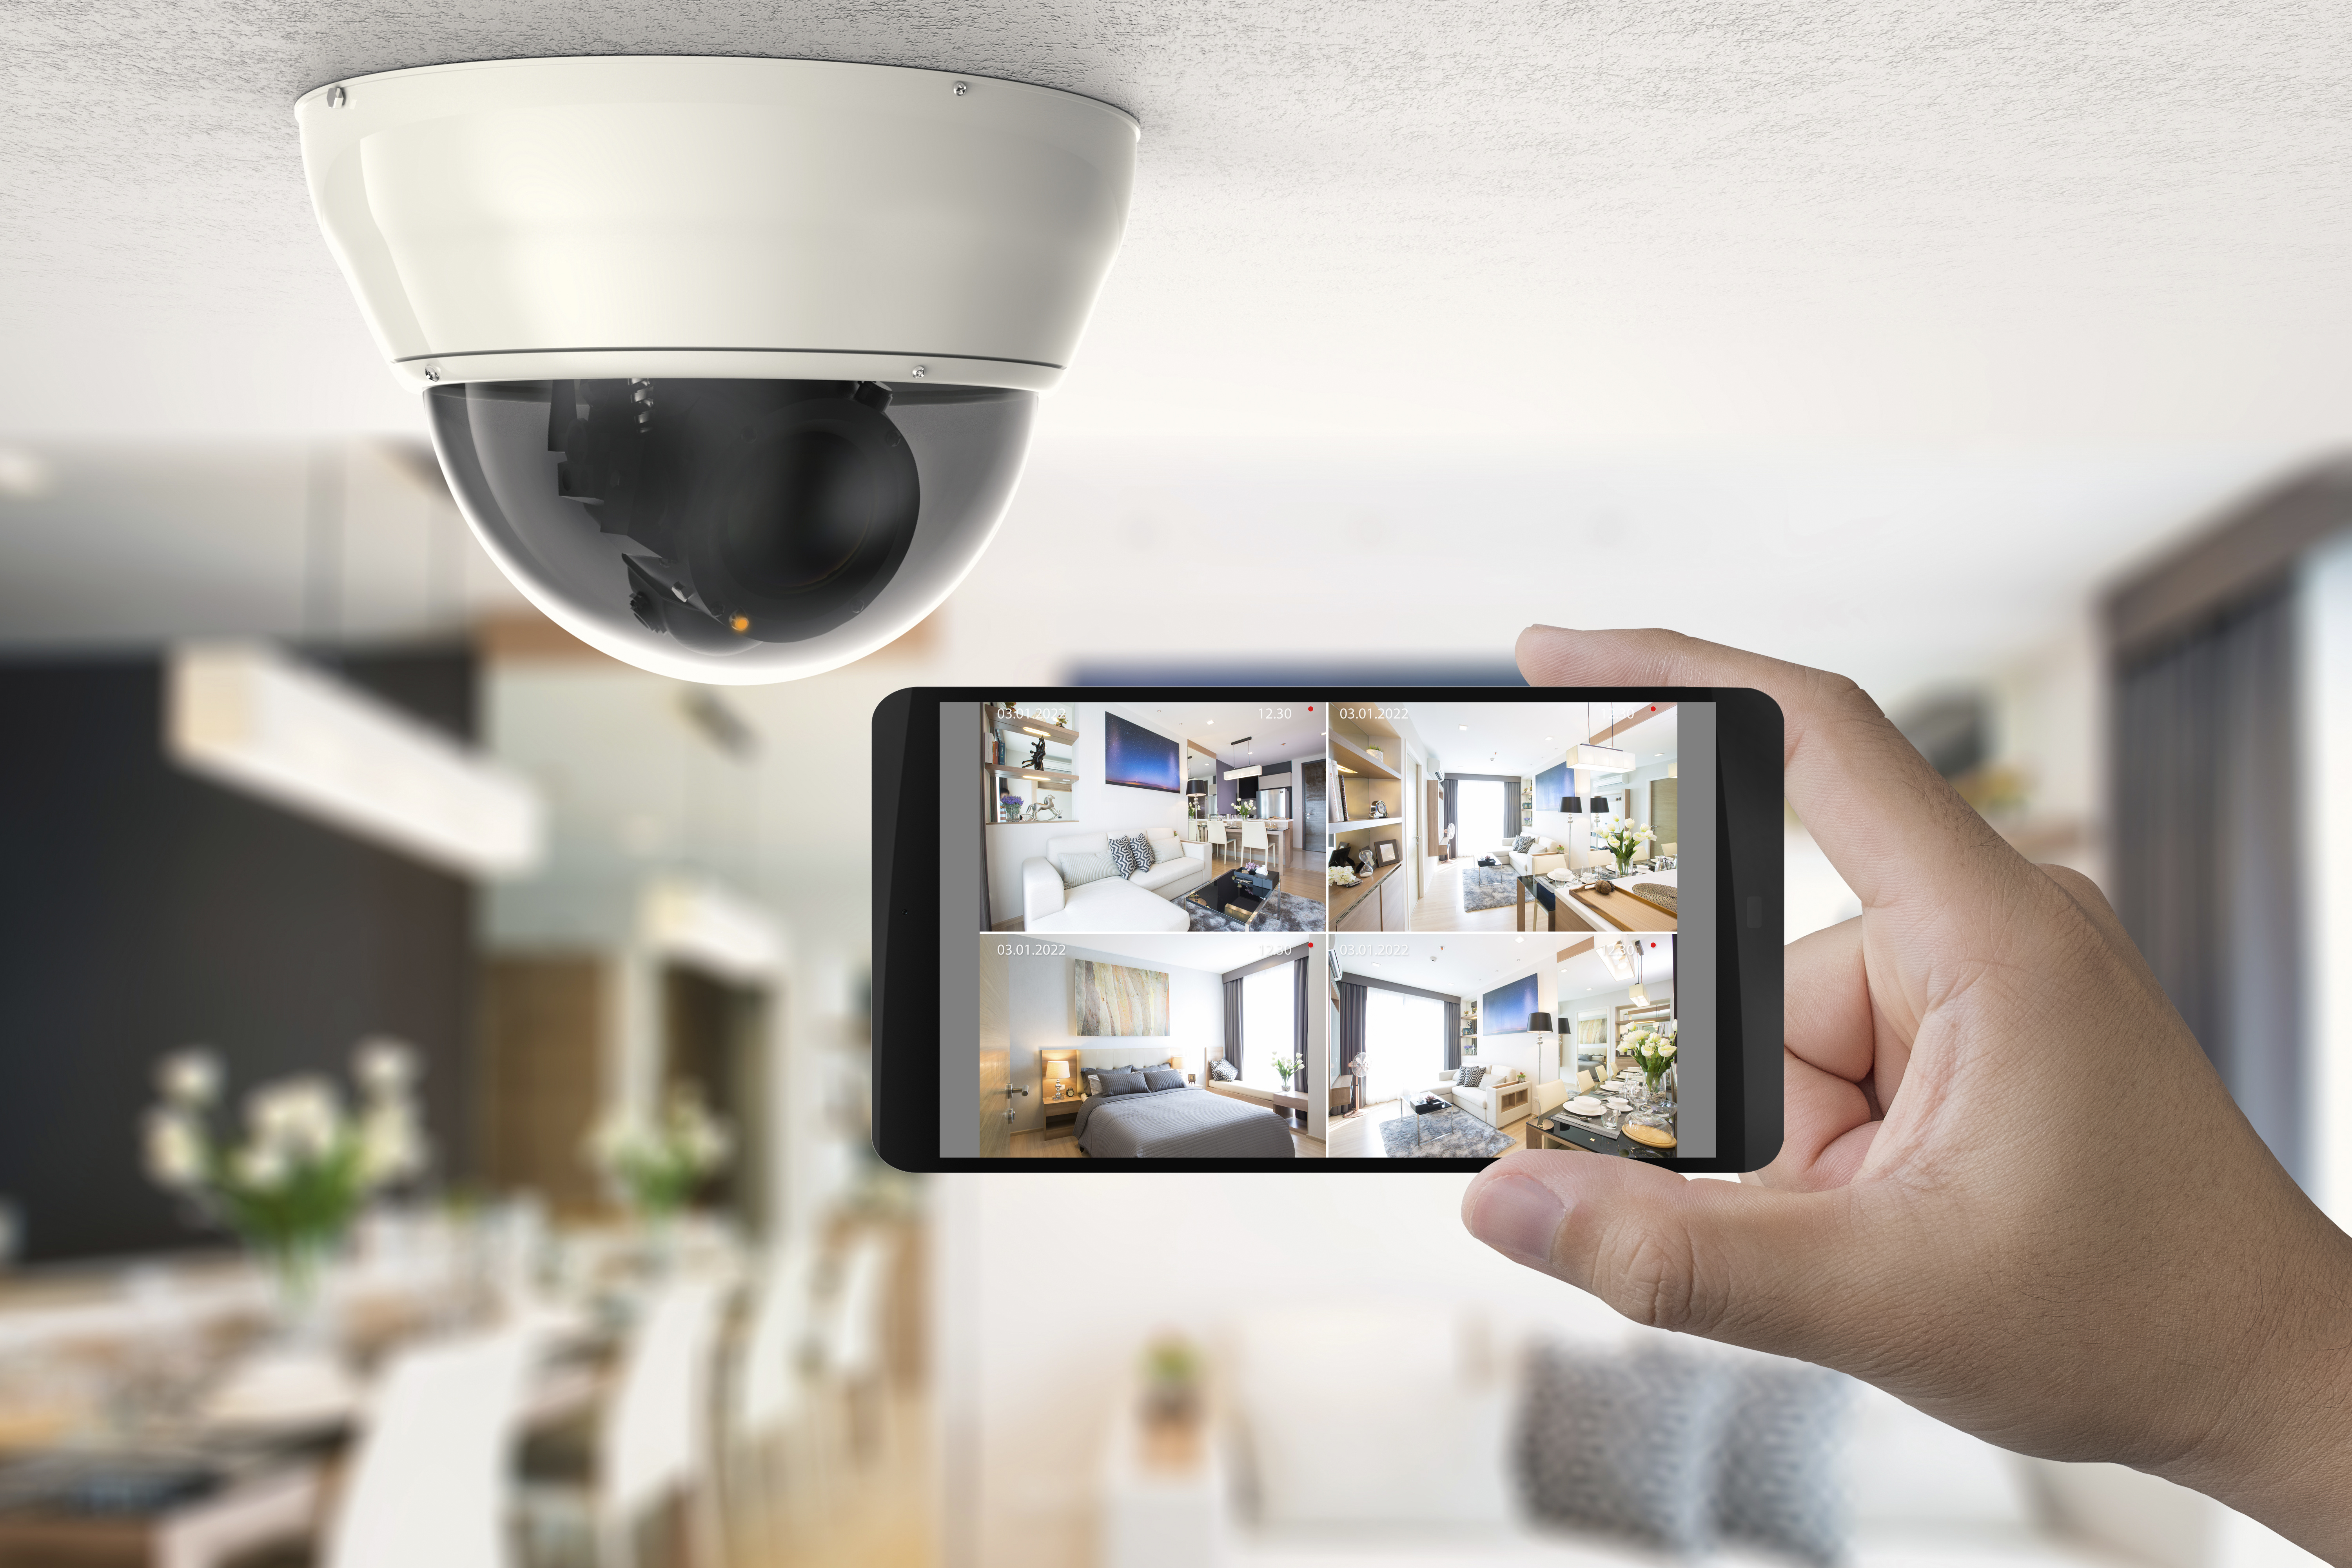 Consider These Six Easy Ways to Improve Home Security